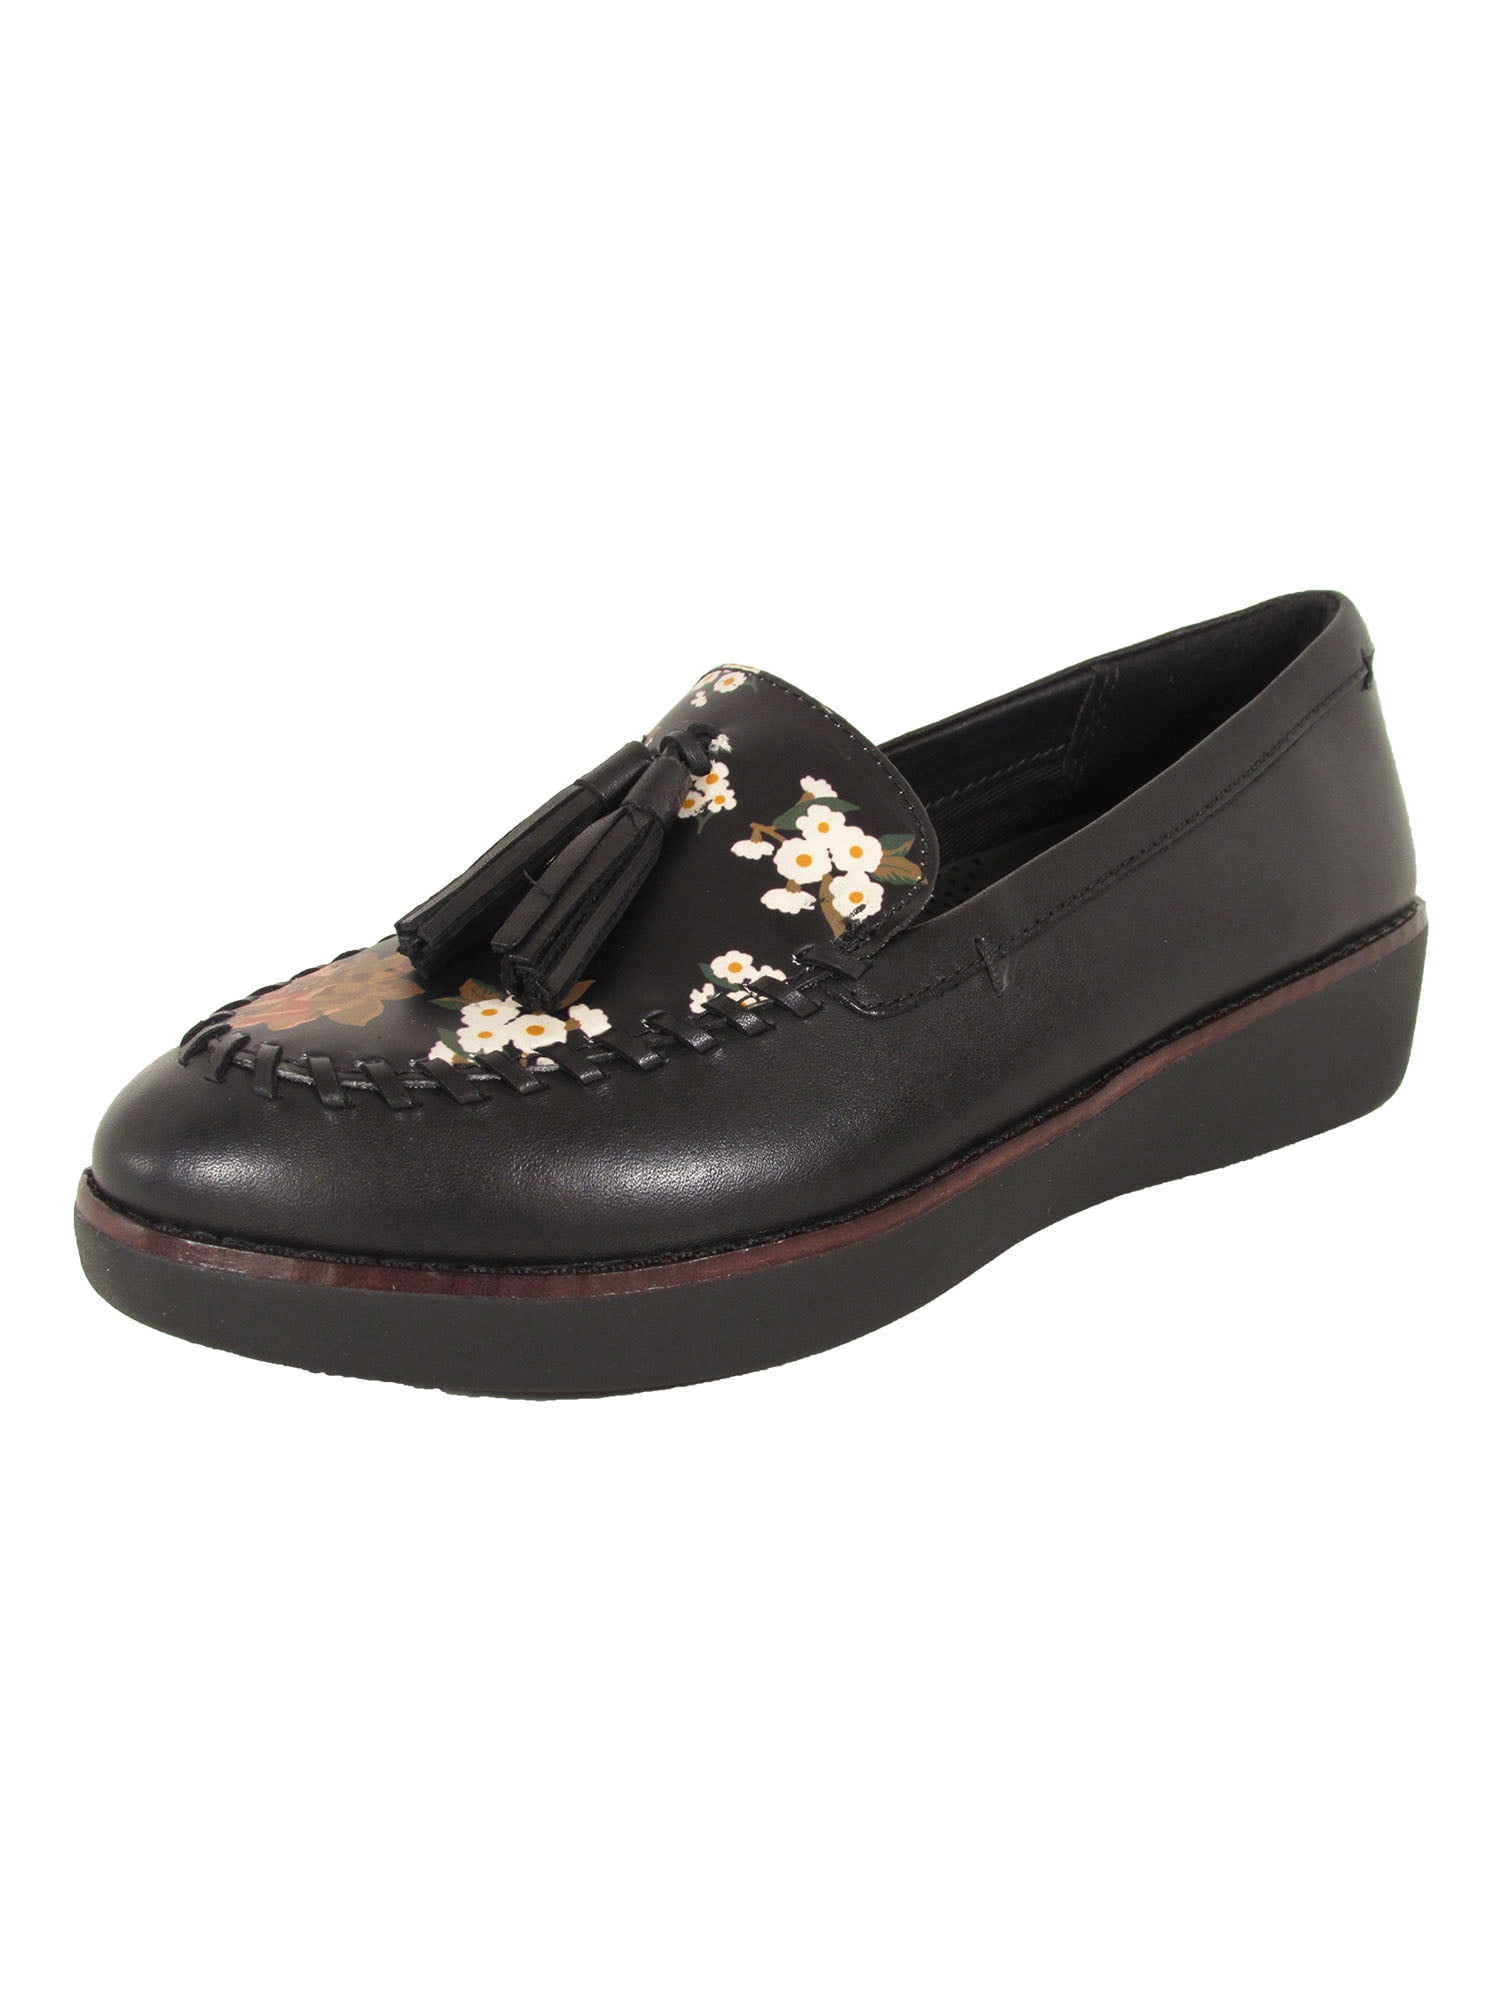 fitflop paige loafers